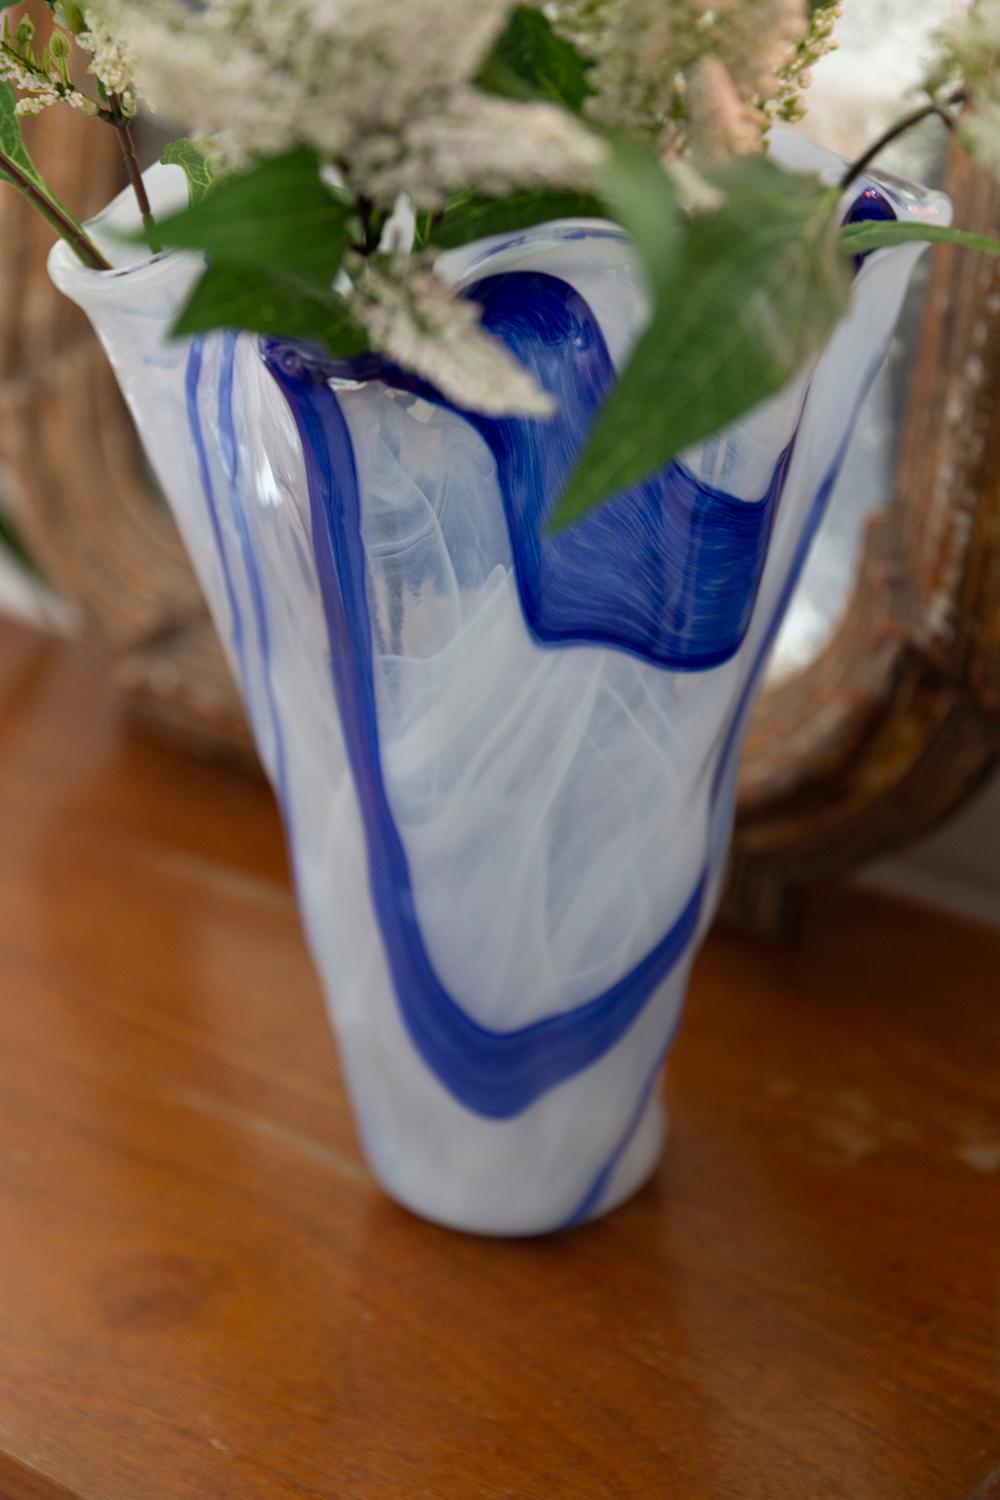 Beautiful vase made from Murano glass in perfect condition. The vase looks like it has just been taken out of the box. No jags, defects etc. Only one unique piece. 

Venetian glass (Italian: vetro veneziano) is glassware made in Venice, typically